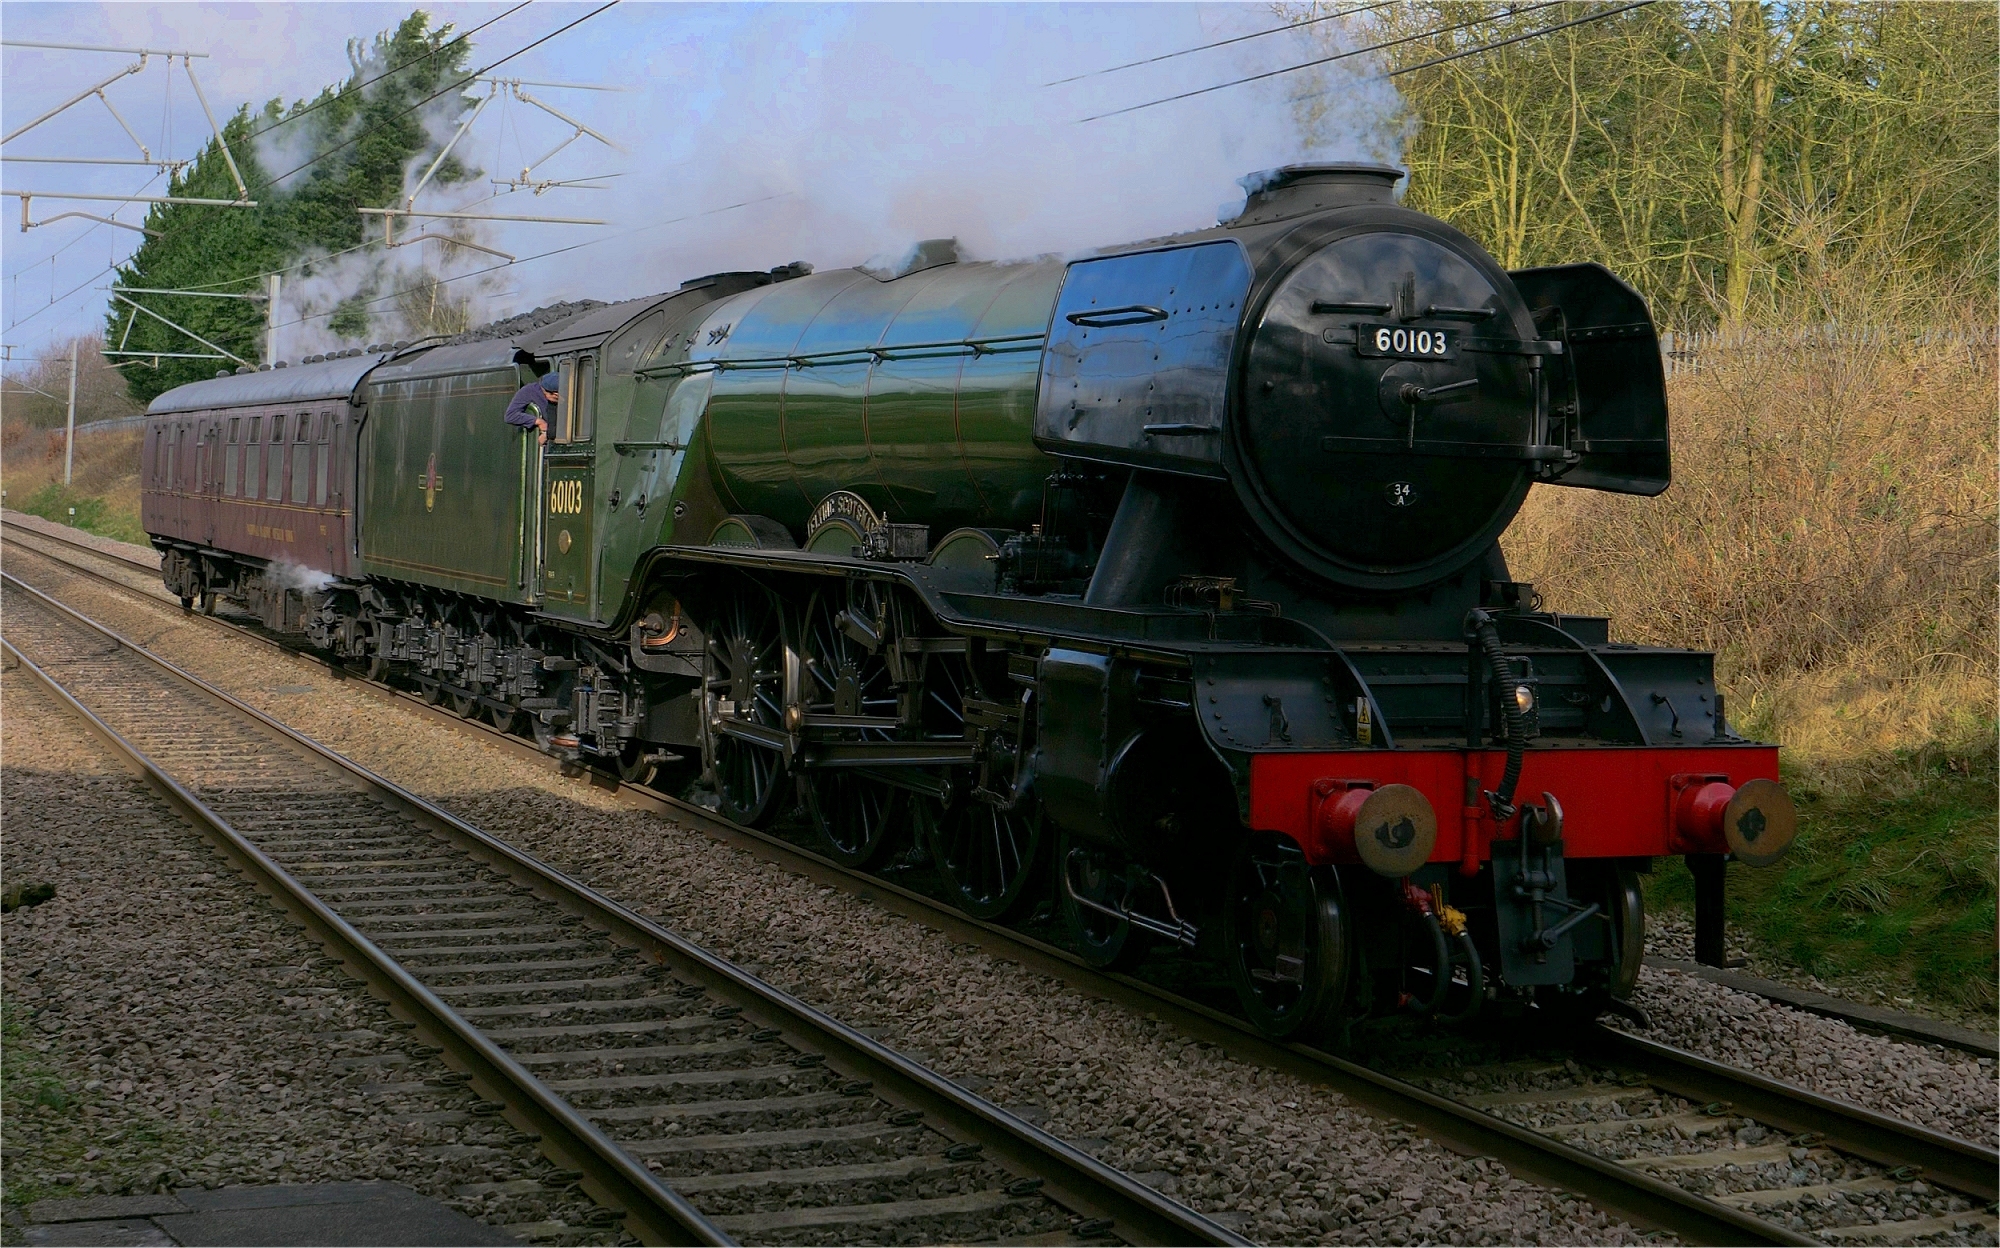 The Flying Scotsman in Winsford by Russell Dean